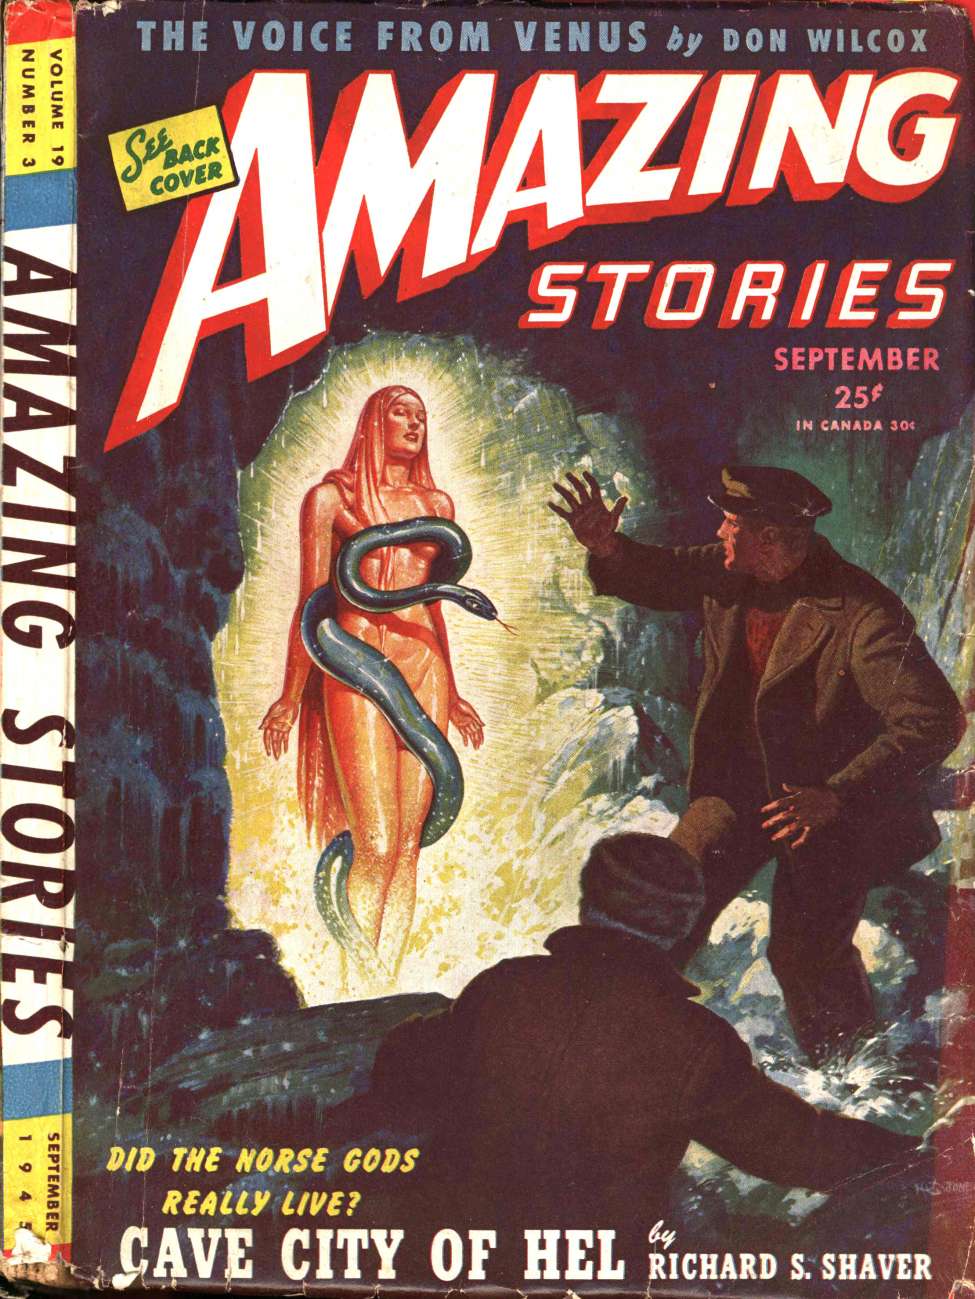 Book Cover For Amazing Stories v19 3 - Cave City of Hel - Richard S. Shaver